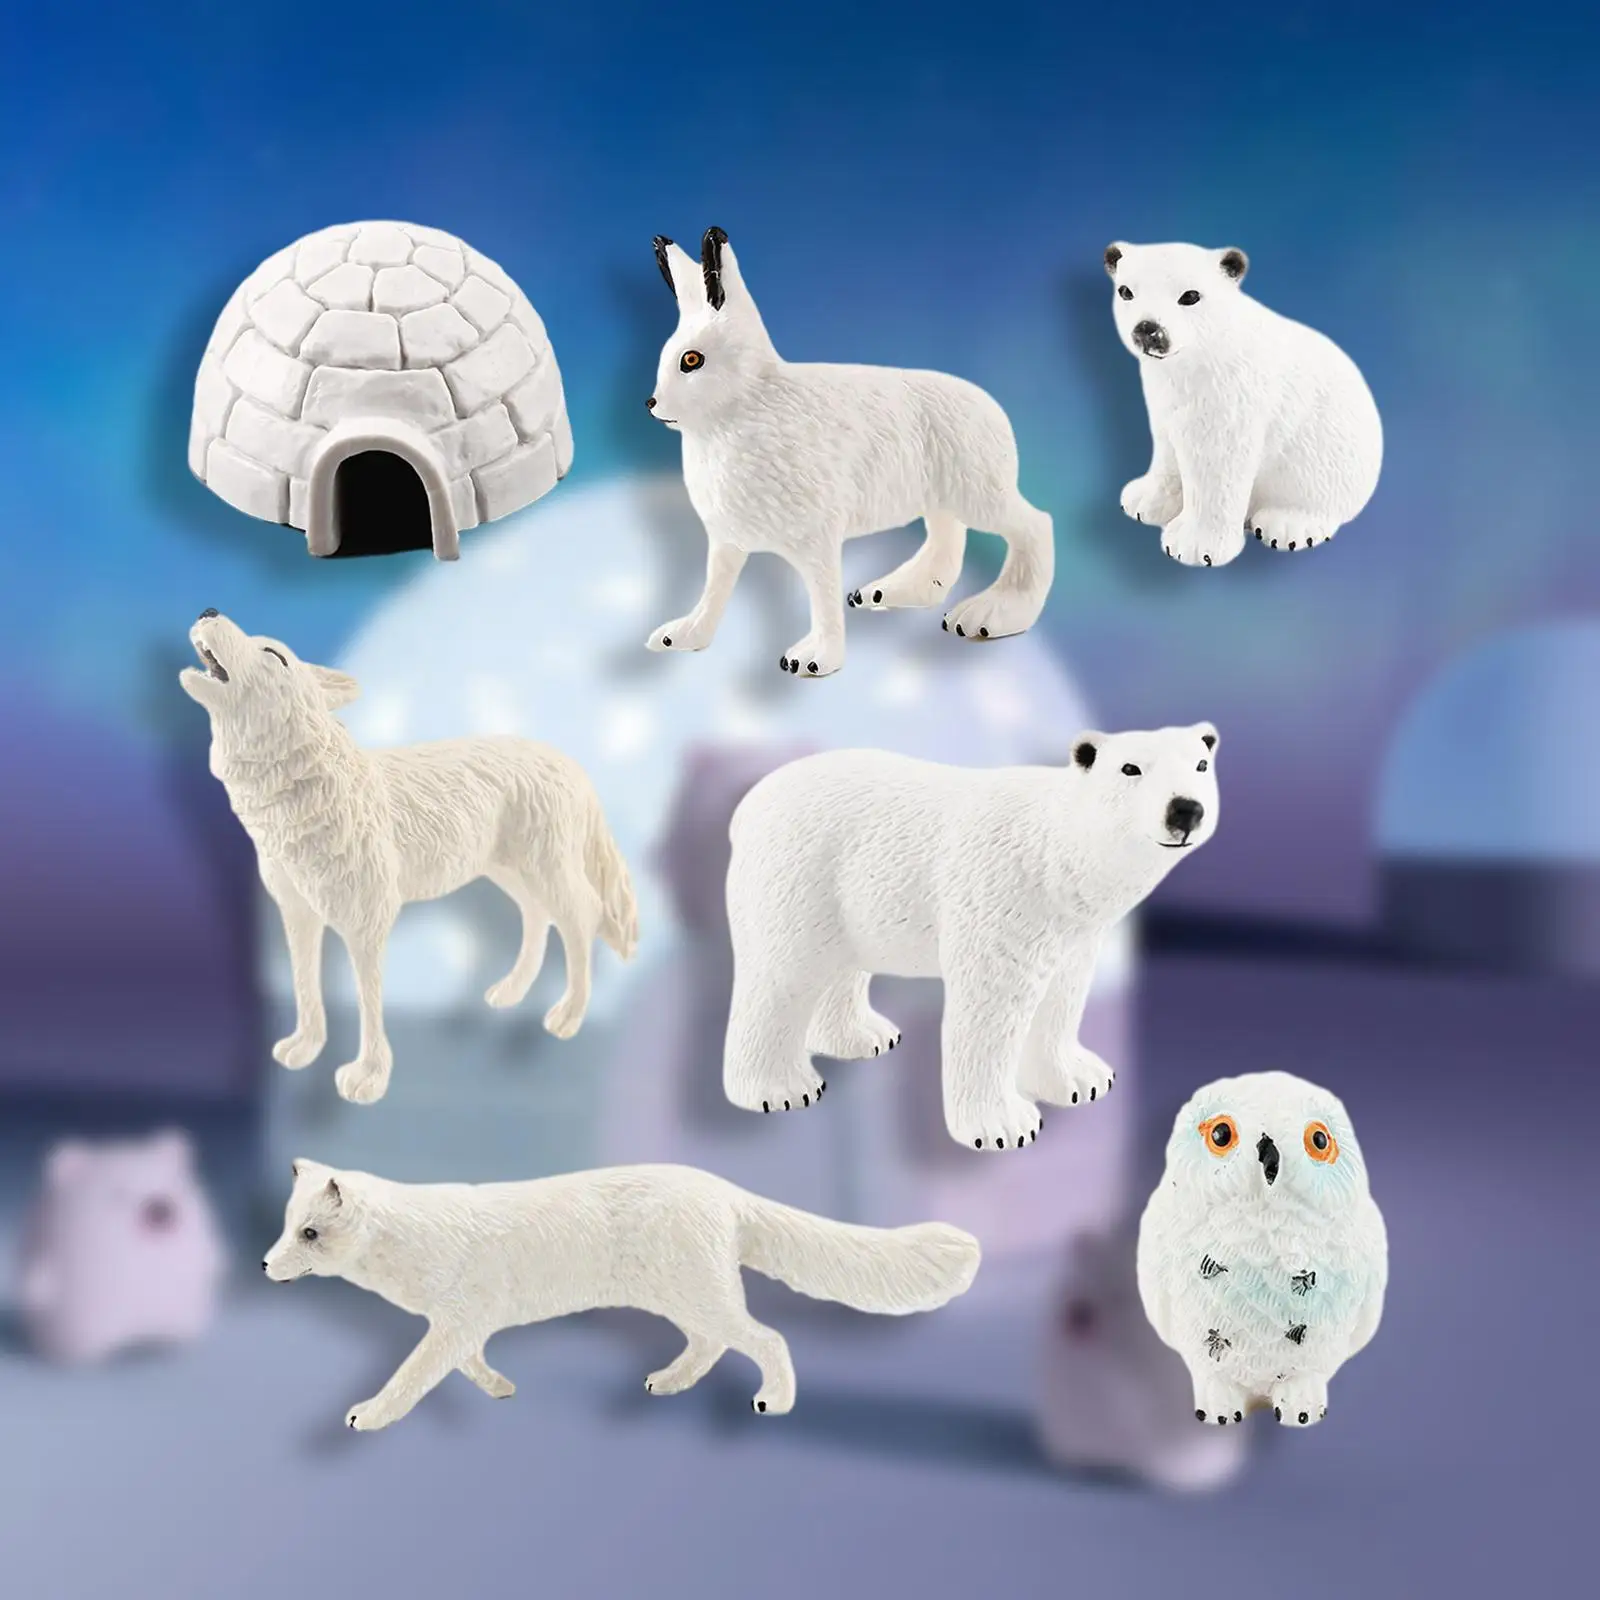 7 Pieces Arctic Animal Model Miniatures for Collection Ornament Party Favors